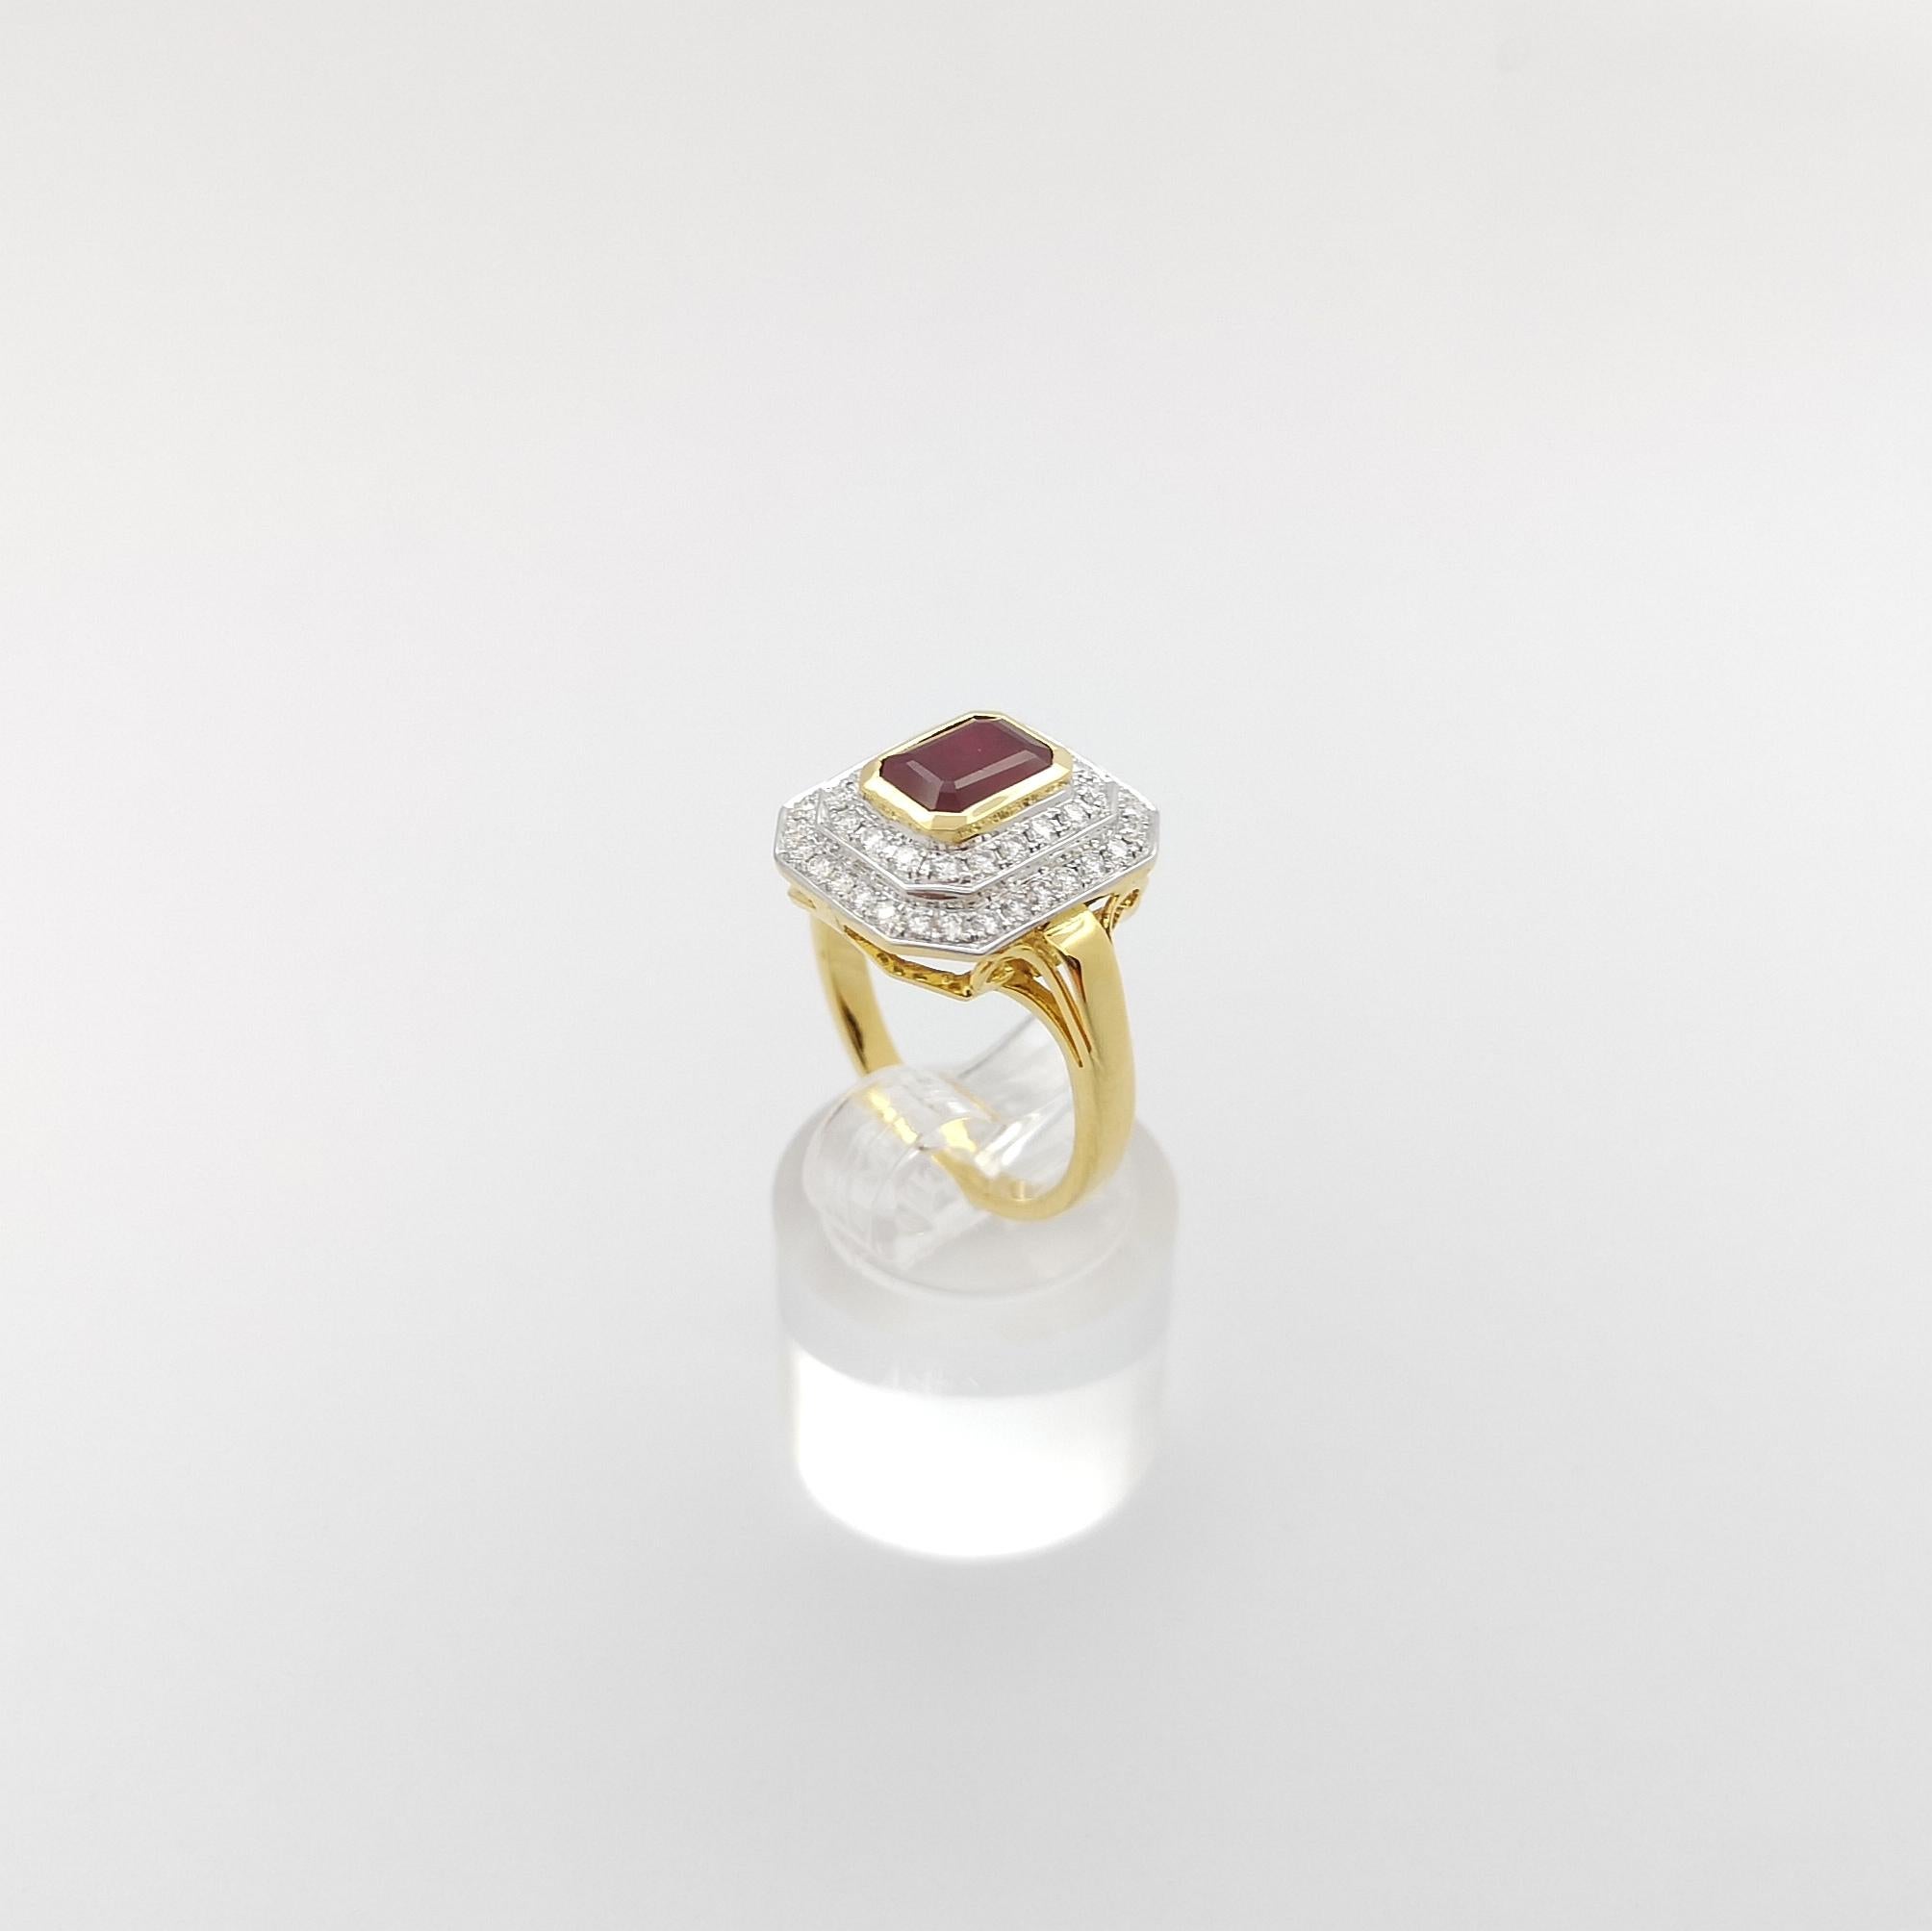 Ruby 0.94 carat with Diamond 0.51 carat Ring set in 18k Gold Settings For Sale 7